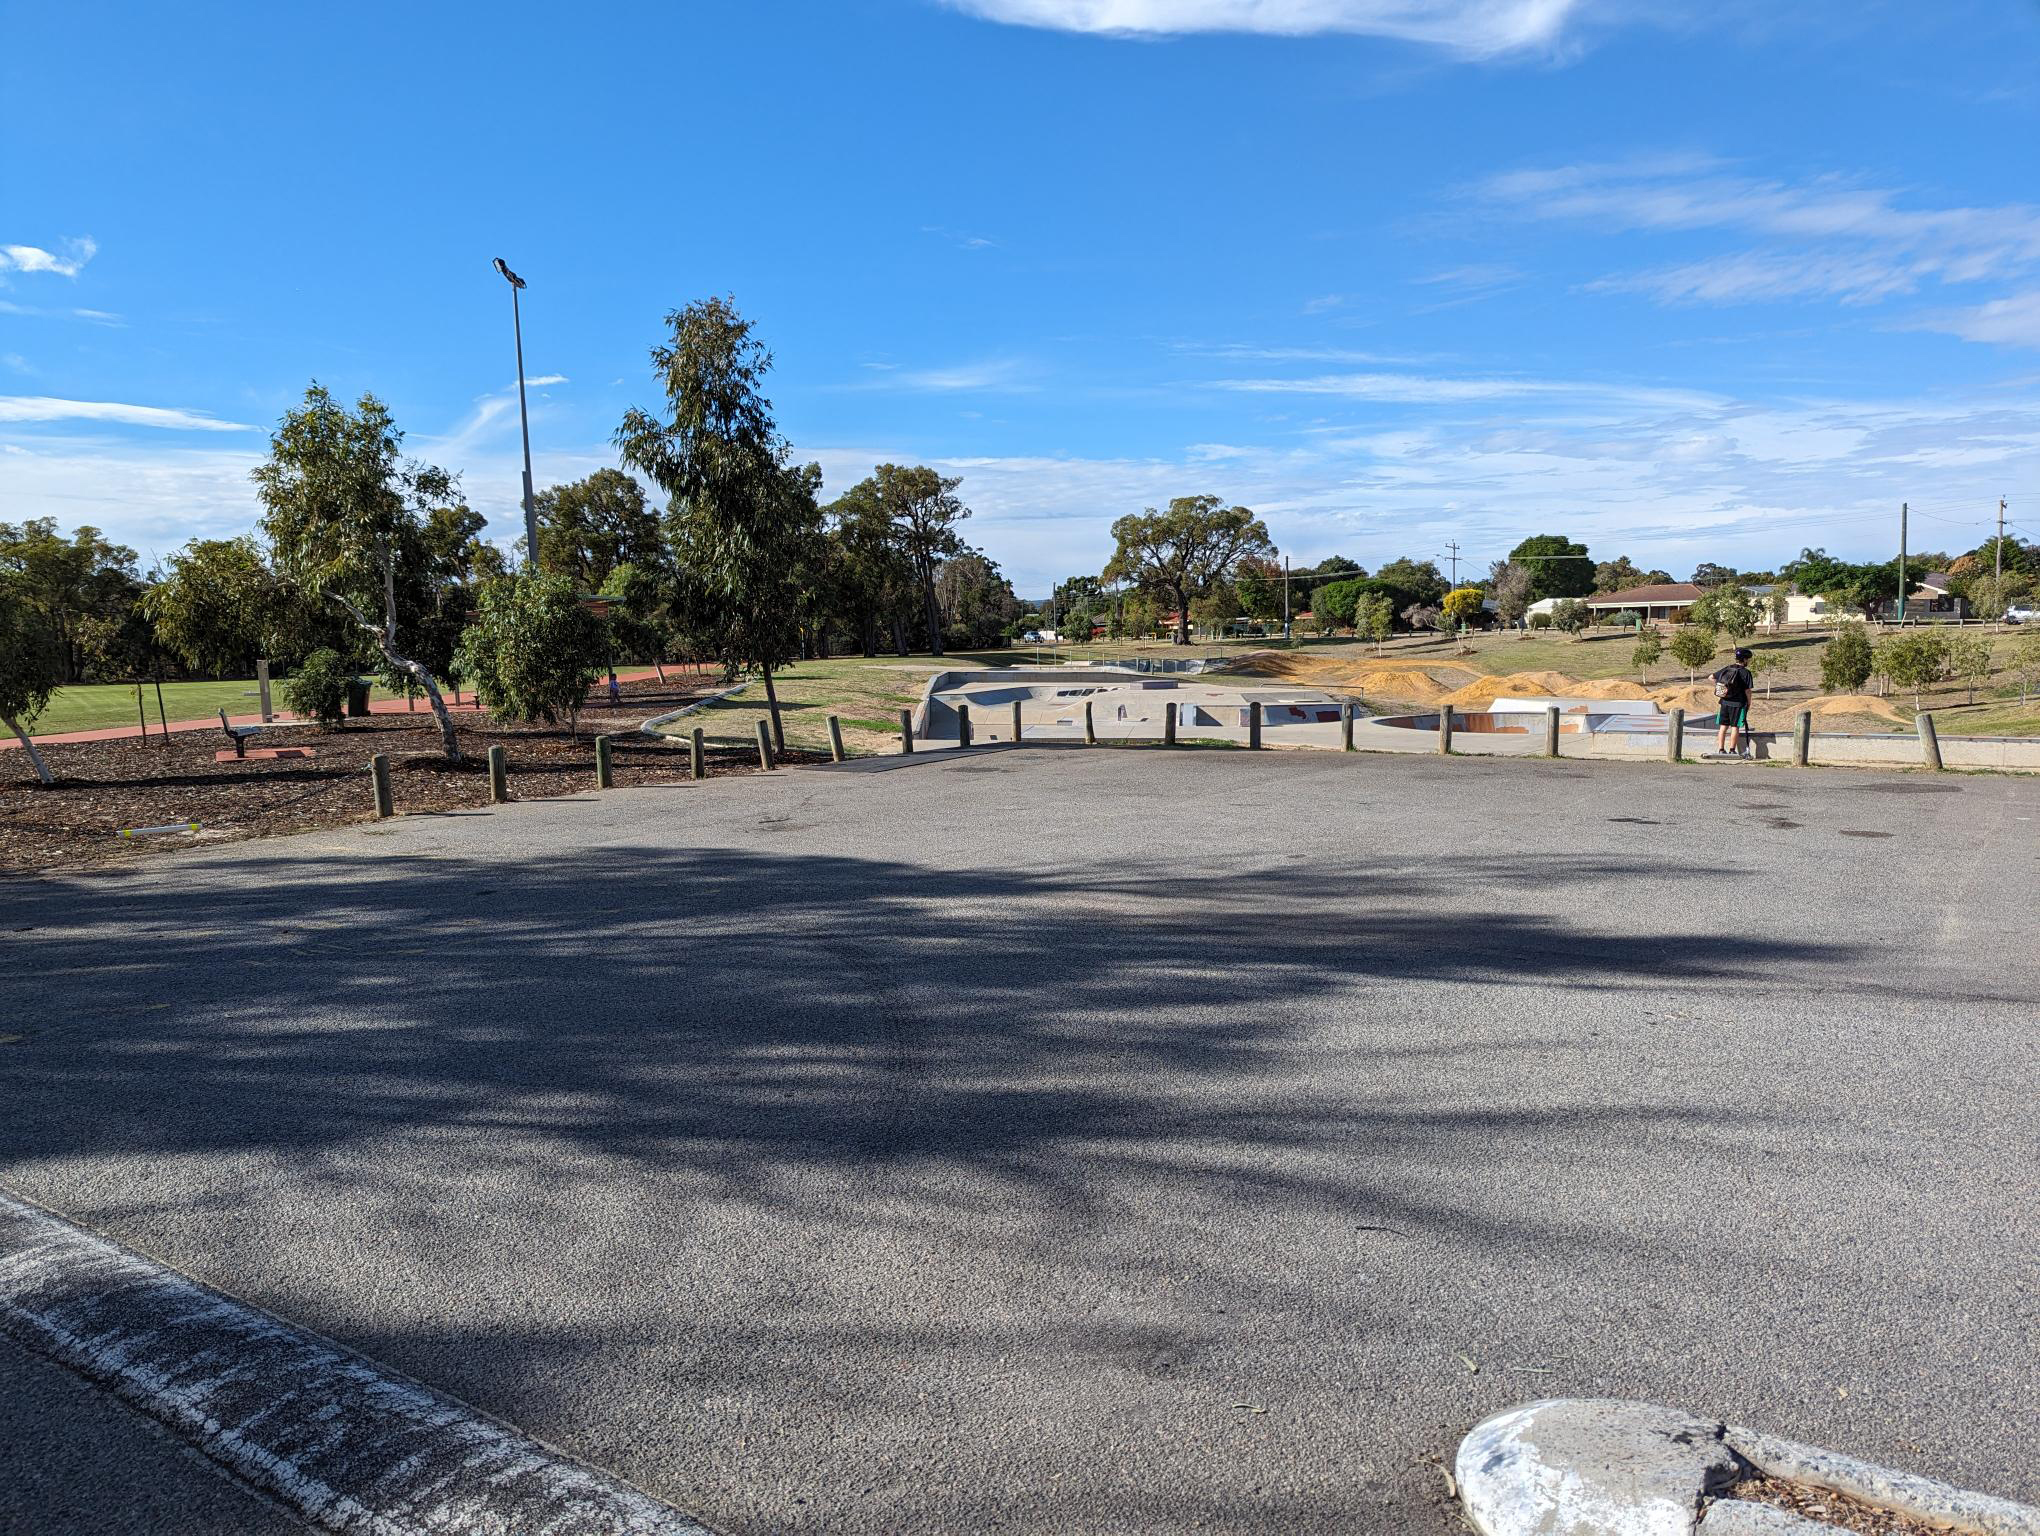 Photo of the Fleming Reserve, High Wycombe car park site for food truck vendors